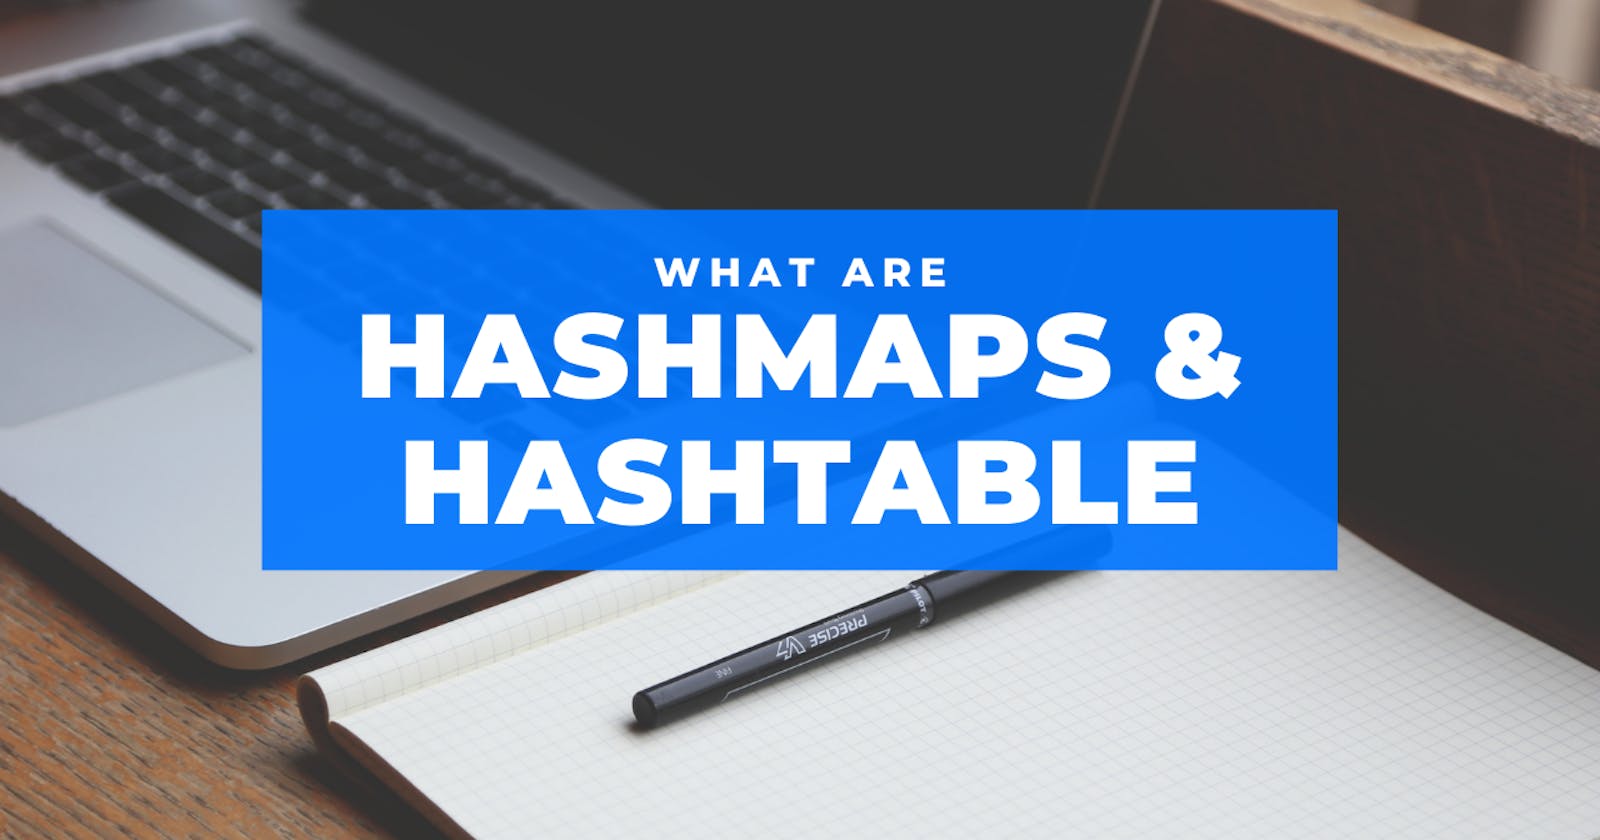 What are Hashmaps and Hashtables in Javascript?